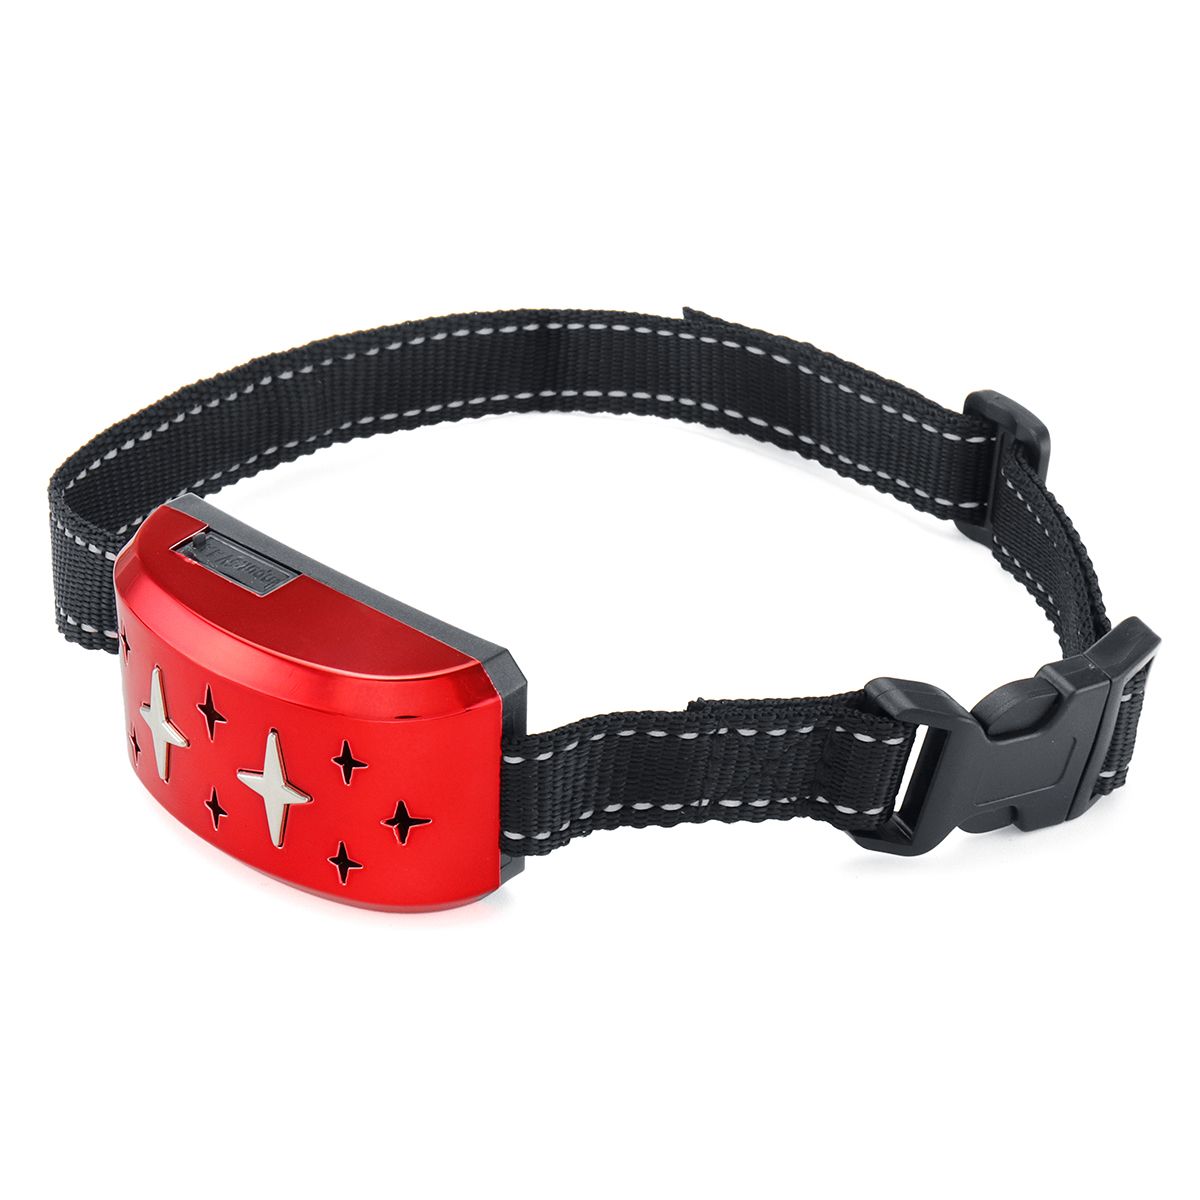 Dog-Bark-Collar-Rechargeable-Stop-Barking-Collar-with-7-Adjustable-Sensitivity-and-Intensity-Levels--1458296